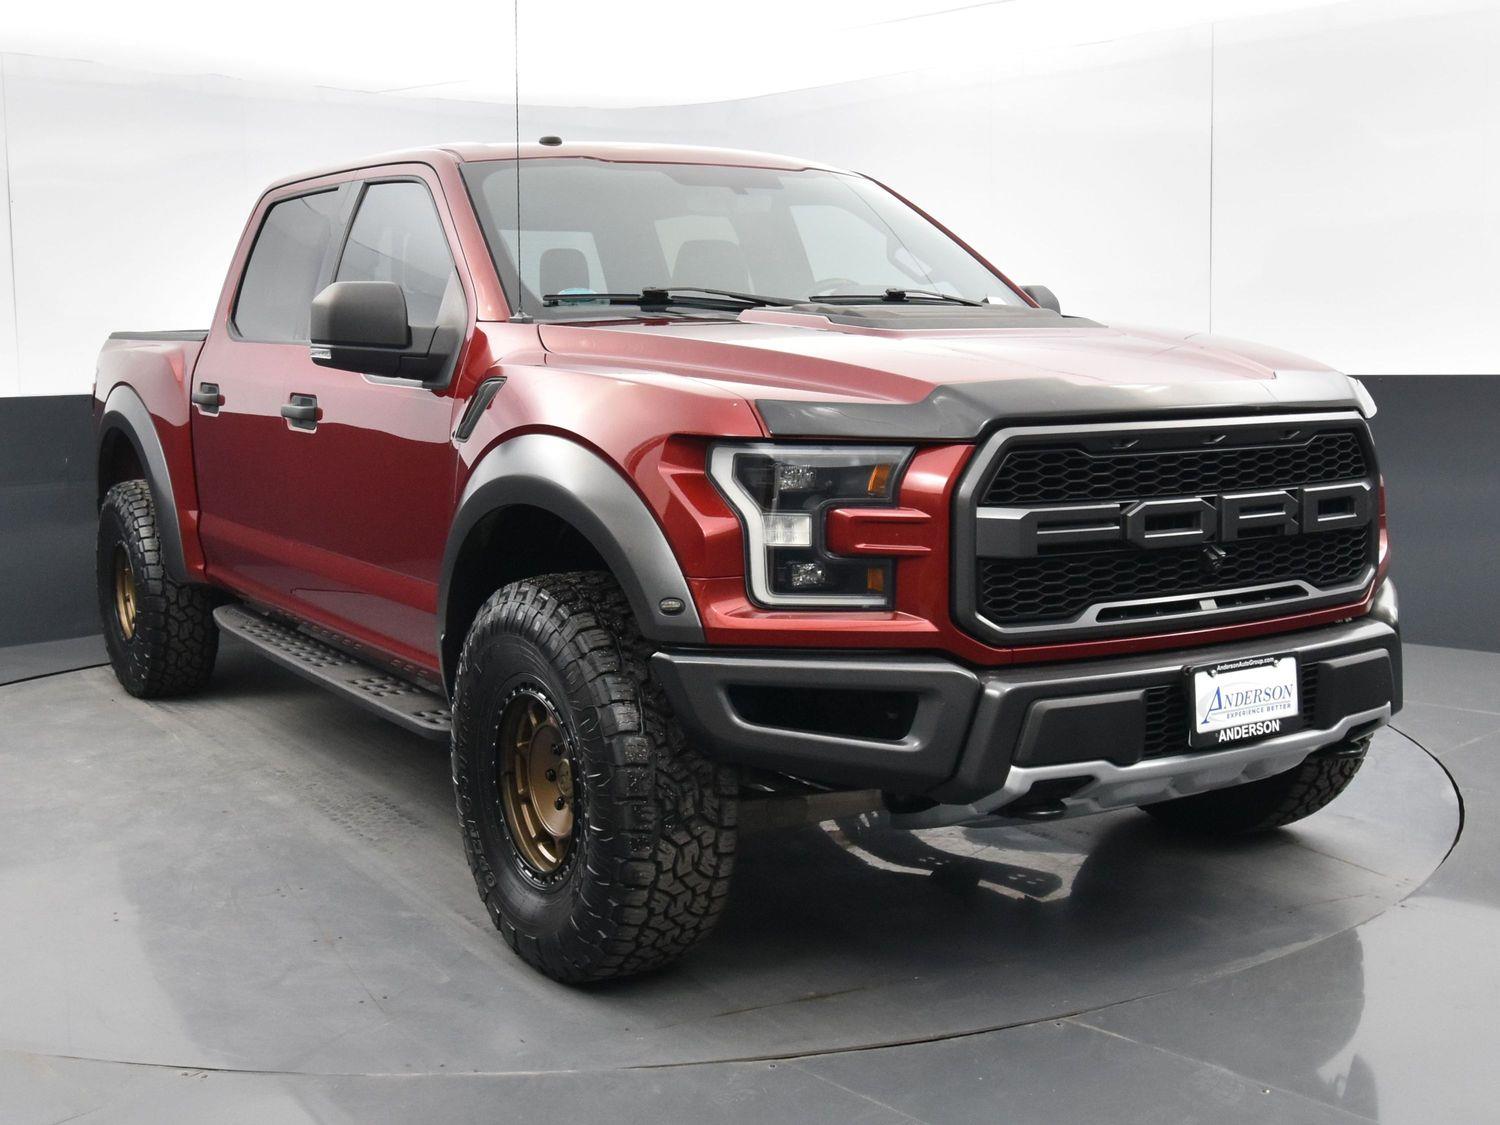 Used 2017 Ford F-150 Raptor SuperCrew Cab Styleside for sale in Grand Island NE